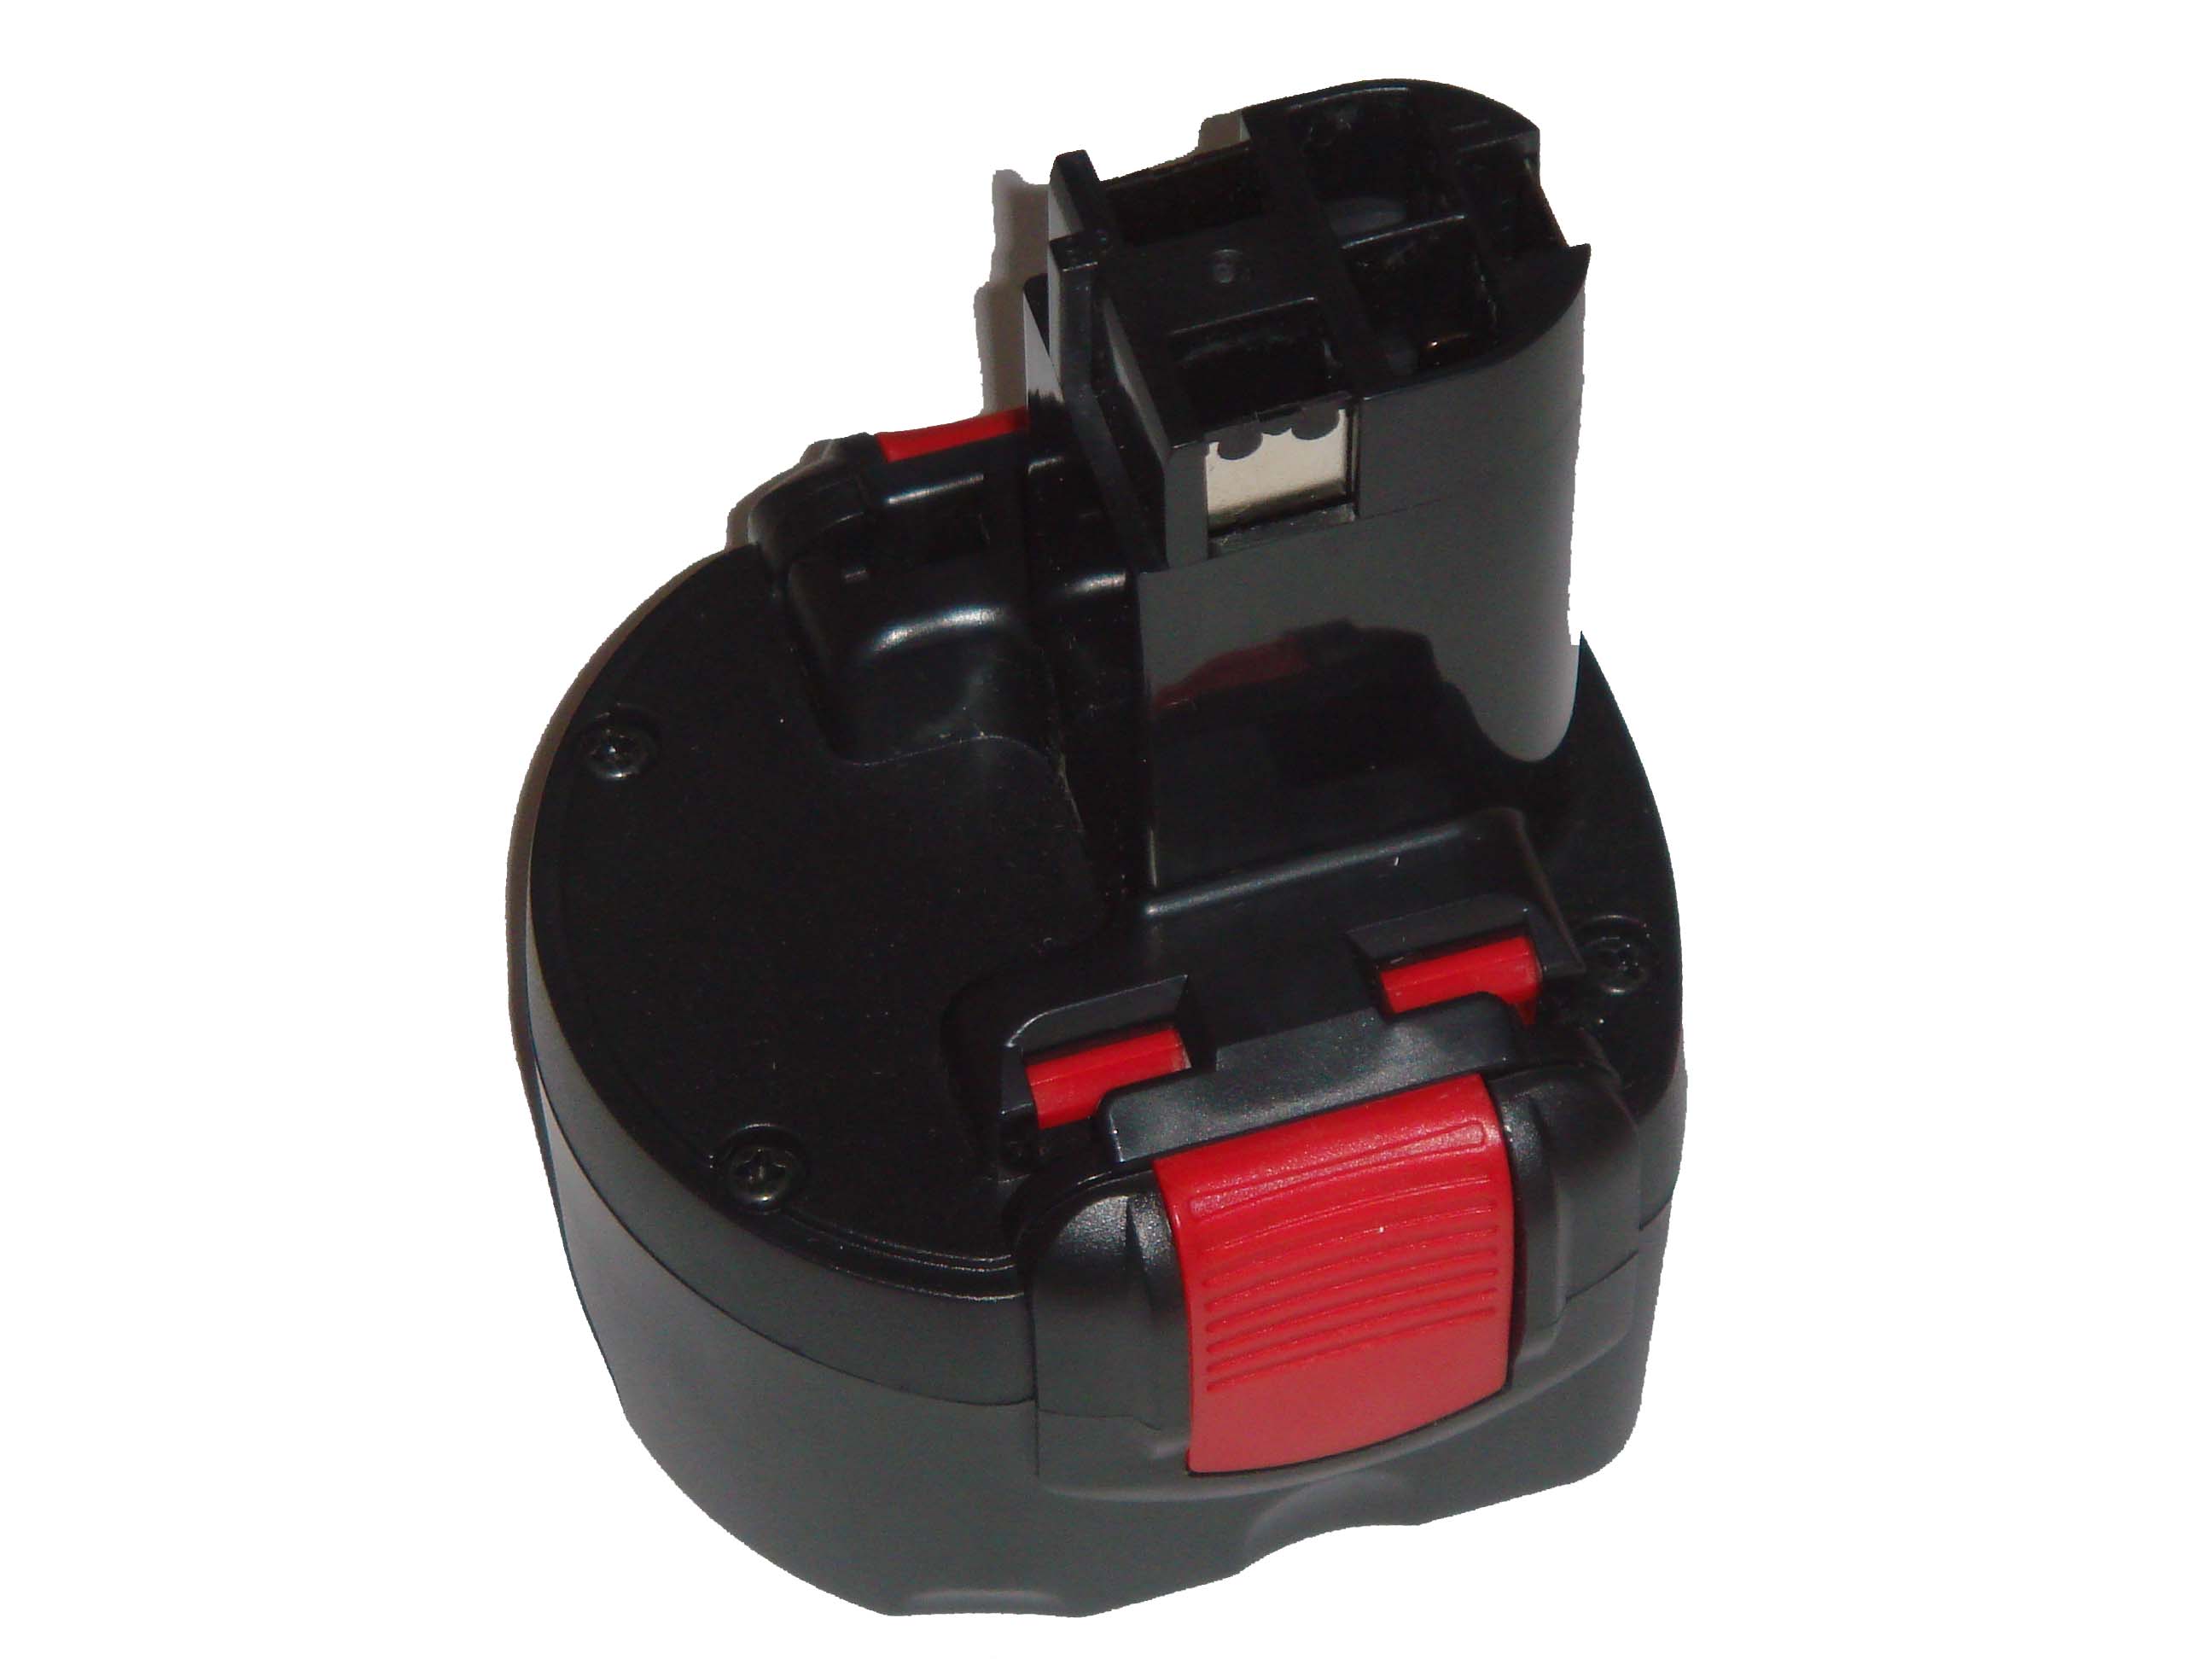 Electric Power Tool Battery Replaces Bosch 2 607 335 707, 2 607 335 272, 2 607 335 260 - 3000 mAh, 9.6 V, NiMH